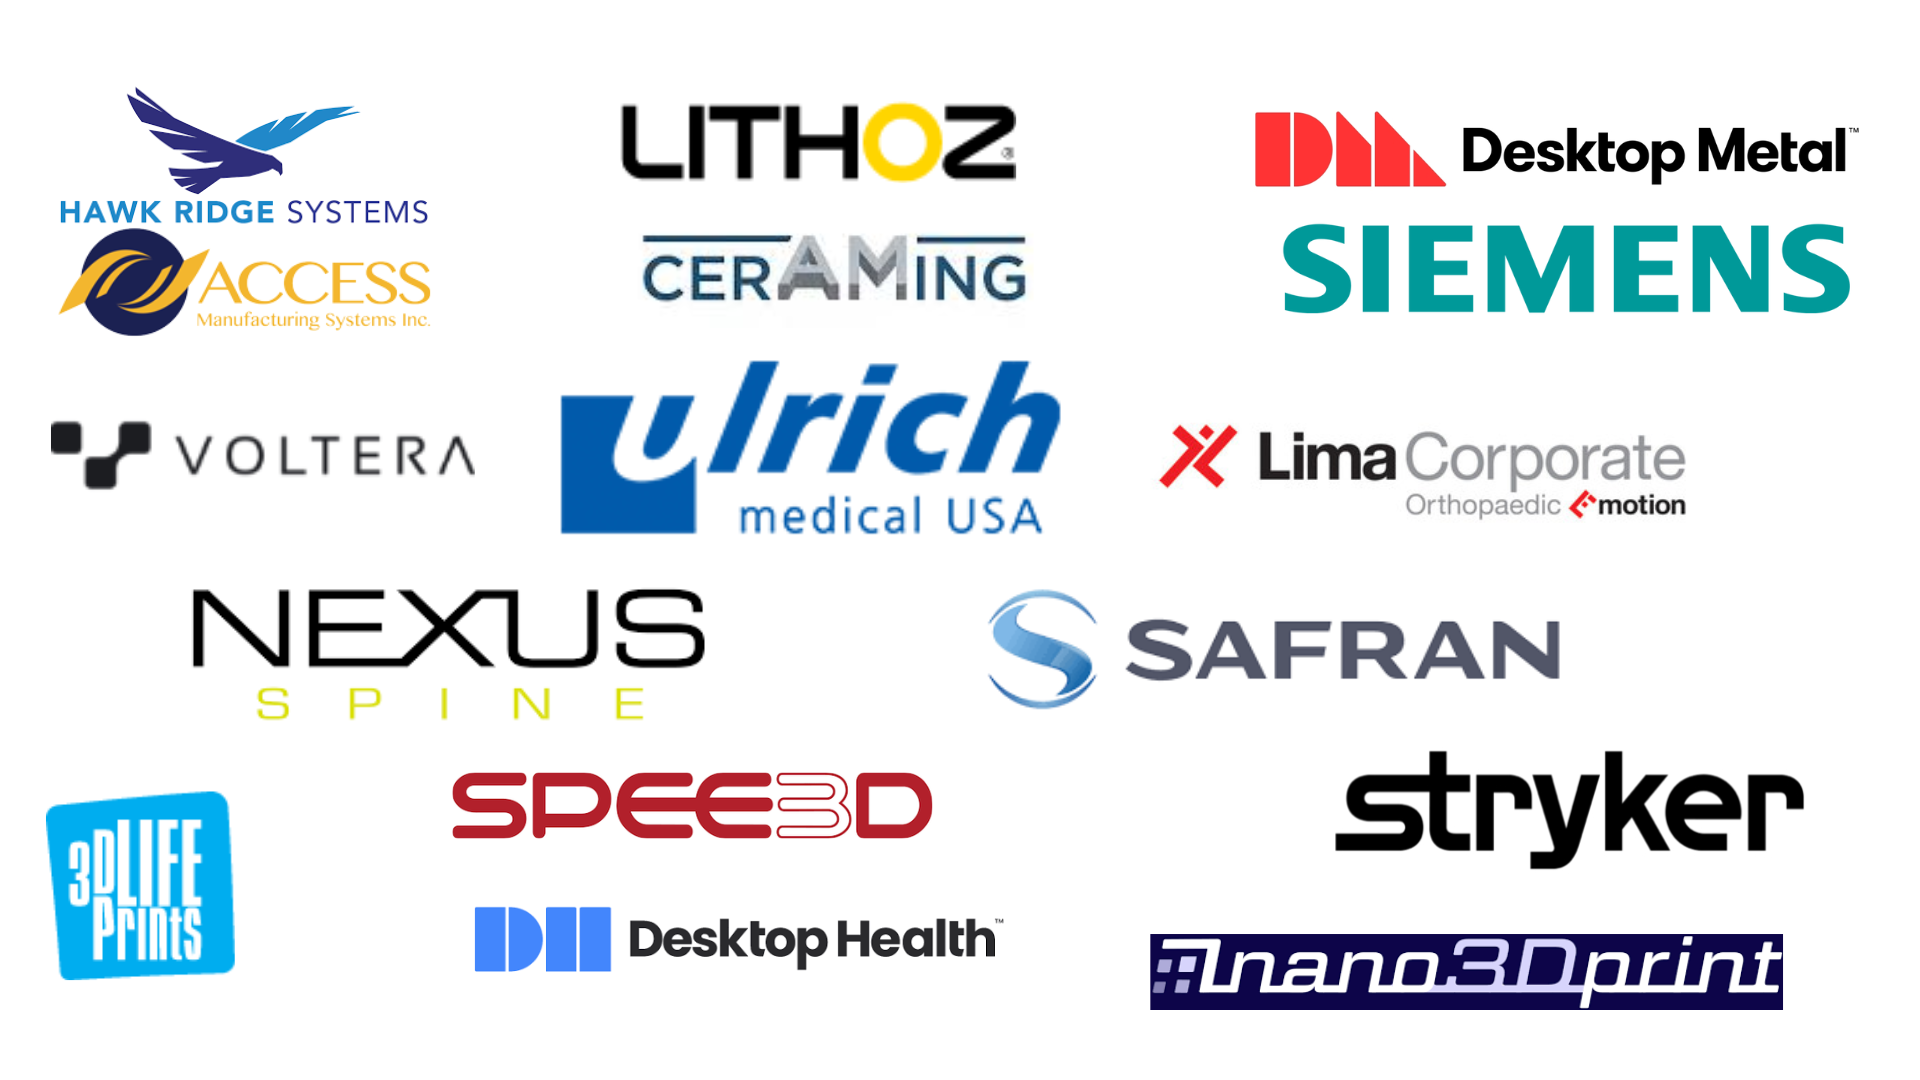 The medical additive manufacturing community announced five 510(k) clearances: three spinal devices, a dental resin, and a surgical platform.